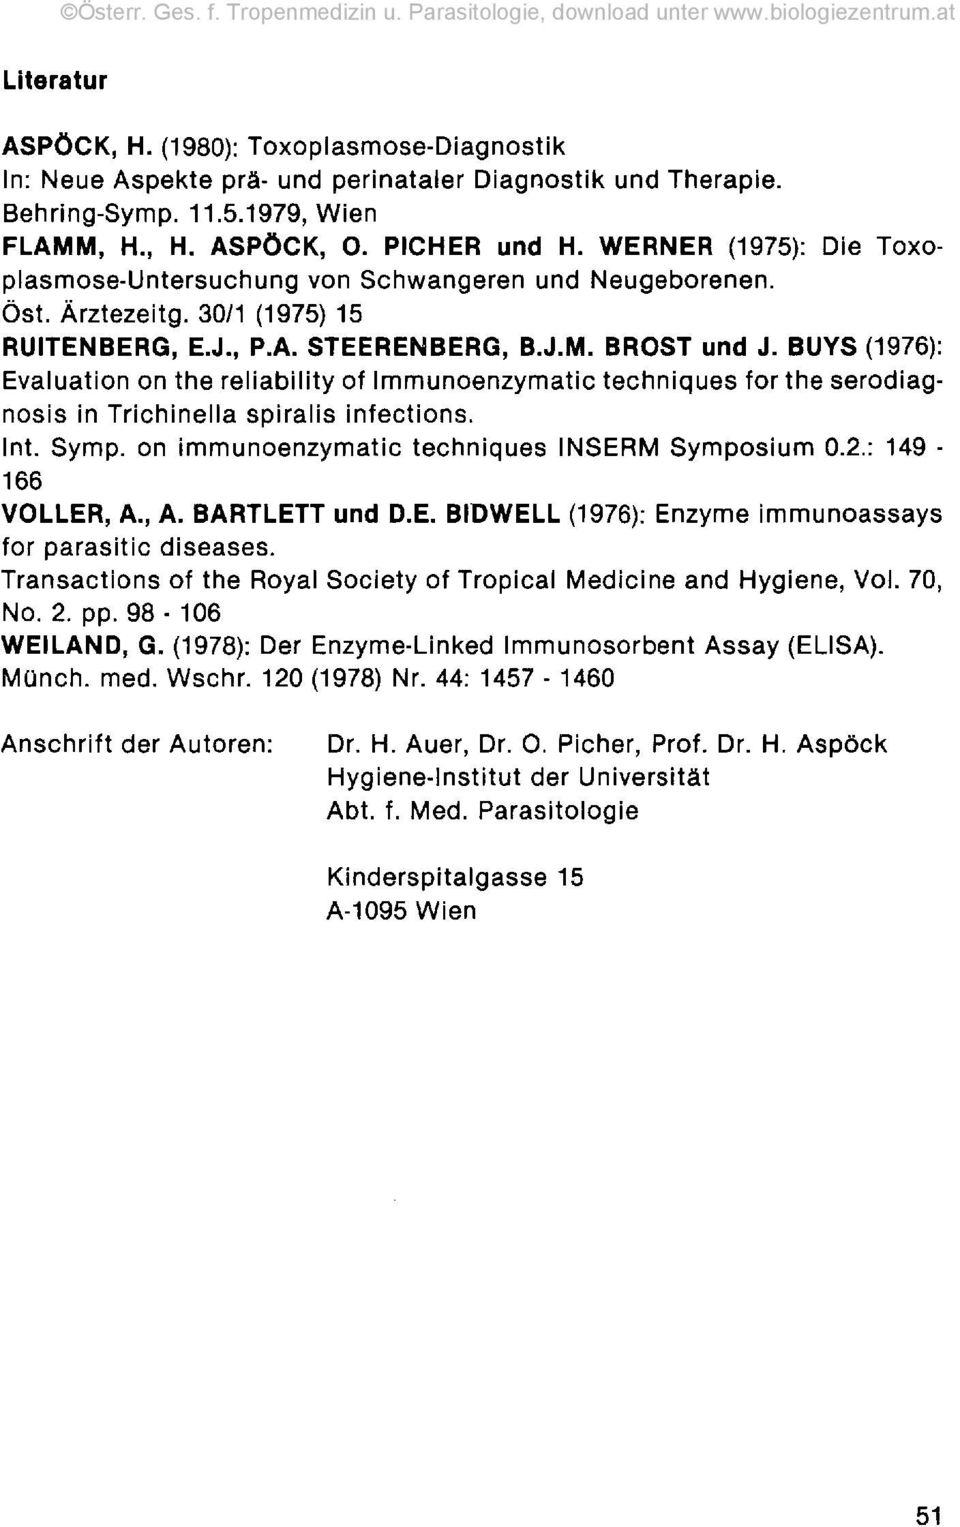 BUYS (1976): Evaluation on the reliability of Immunoenzymatic techniques for the serodiagnosis in Trichinella spiralis infections. Int. Symp. on immunoenzymatic techniques INSERM Symposium O.2.